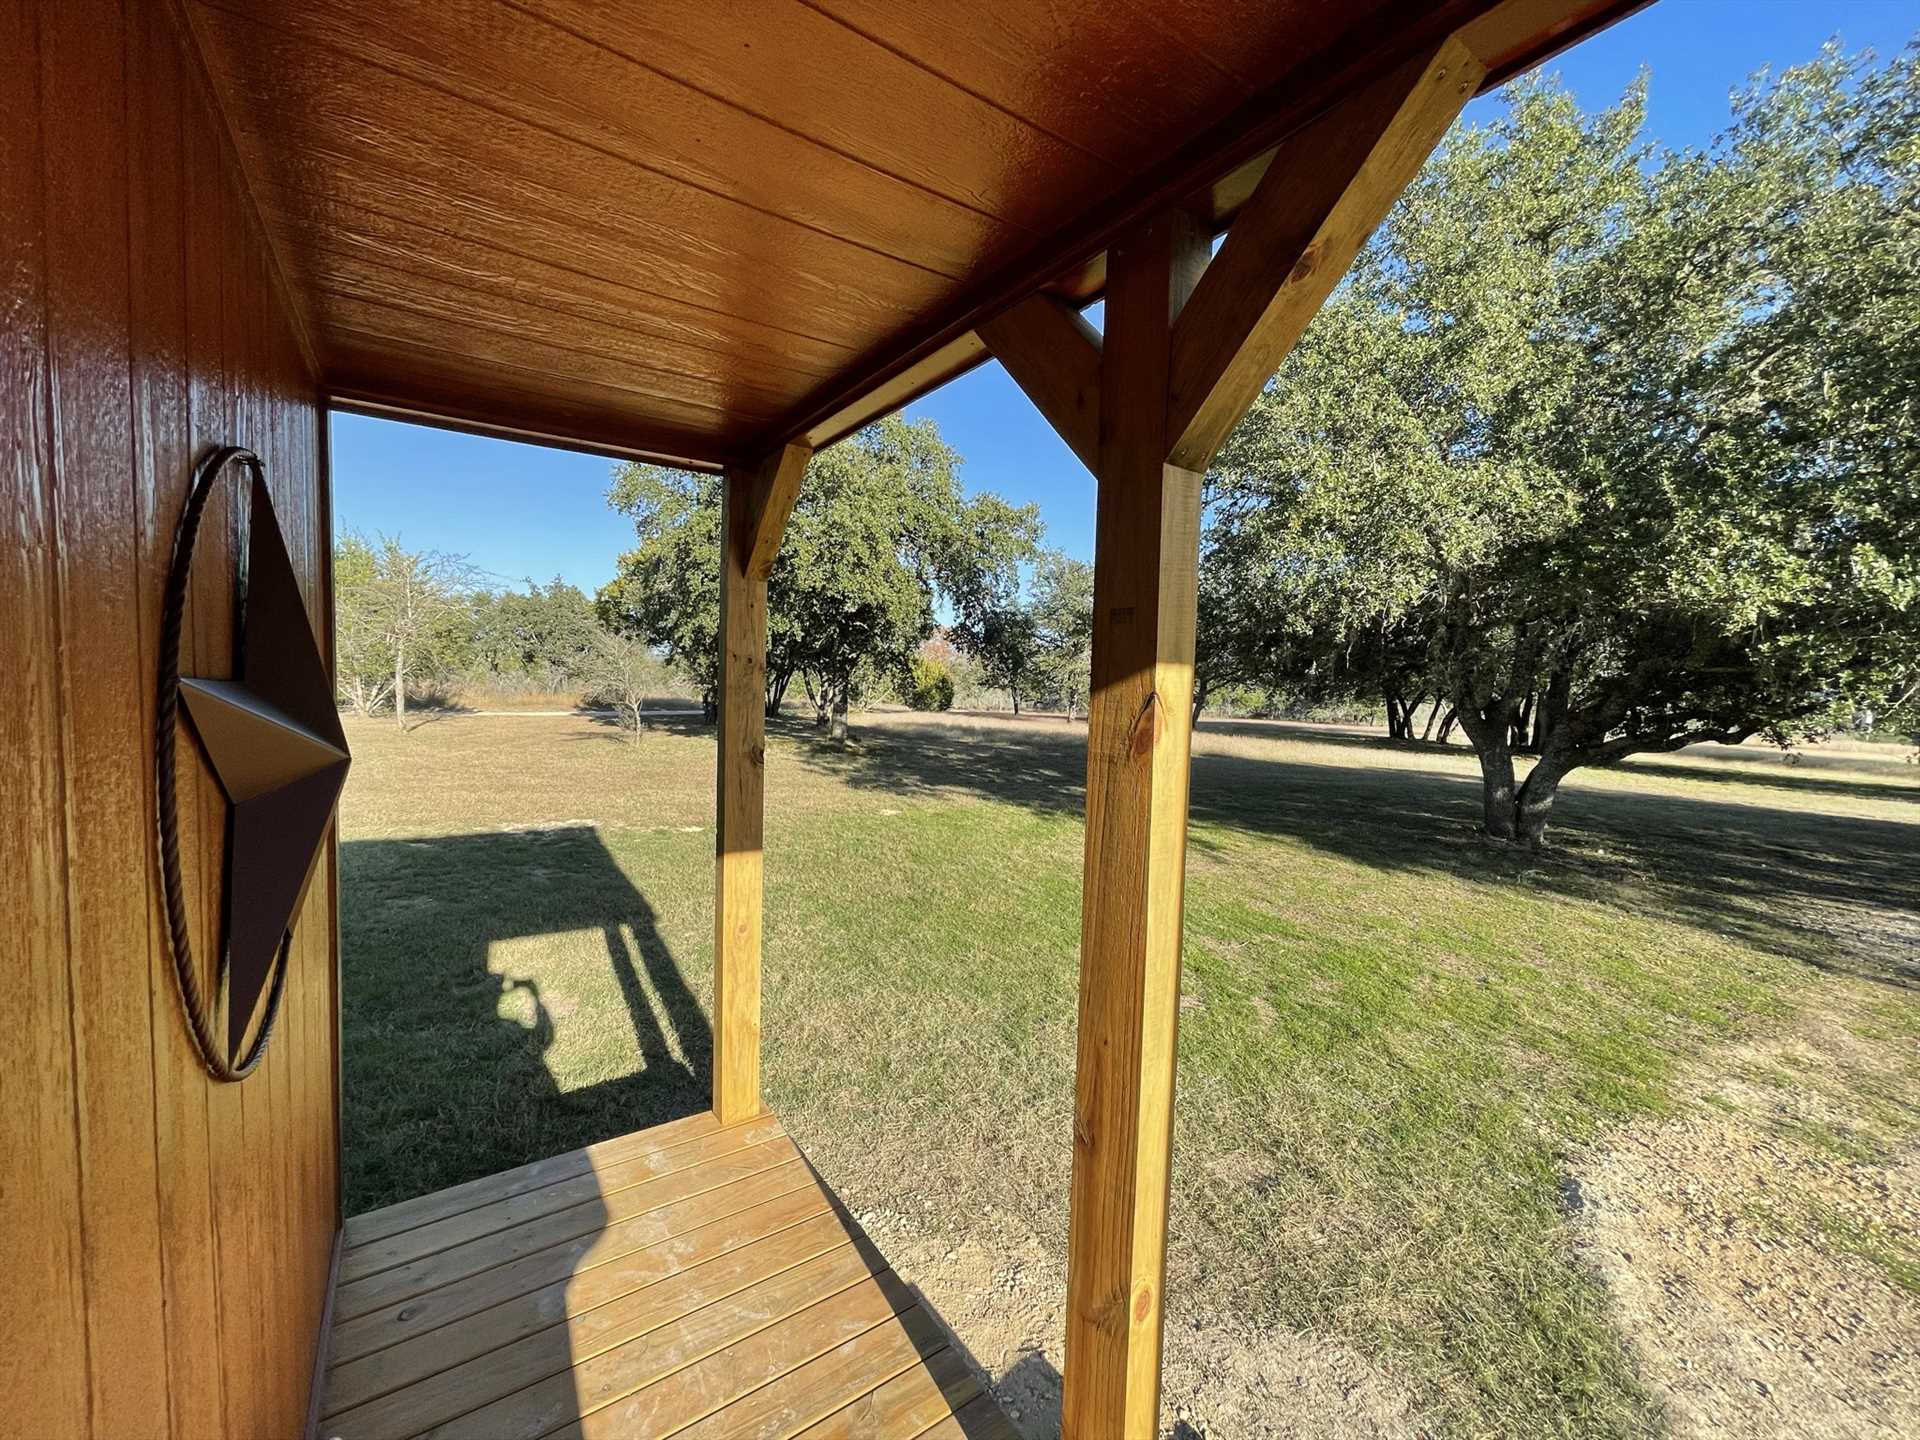                                                 Watch wildlife and admire the Hill Country from your shaded porch!